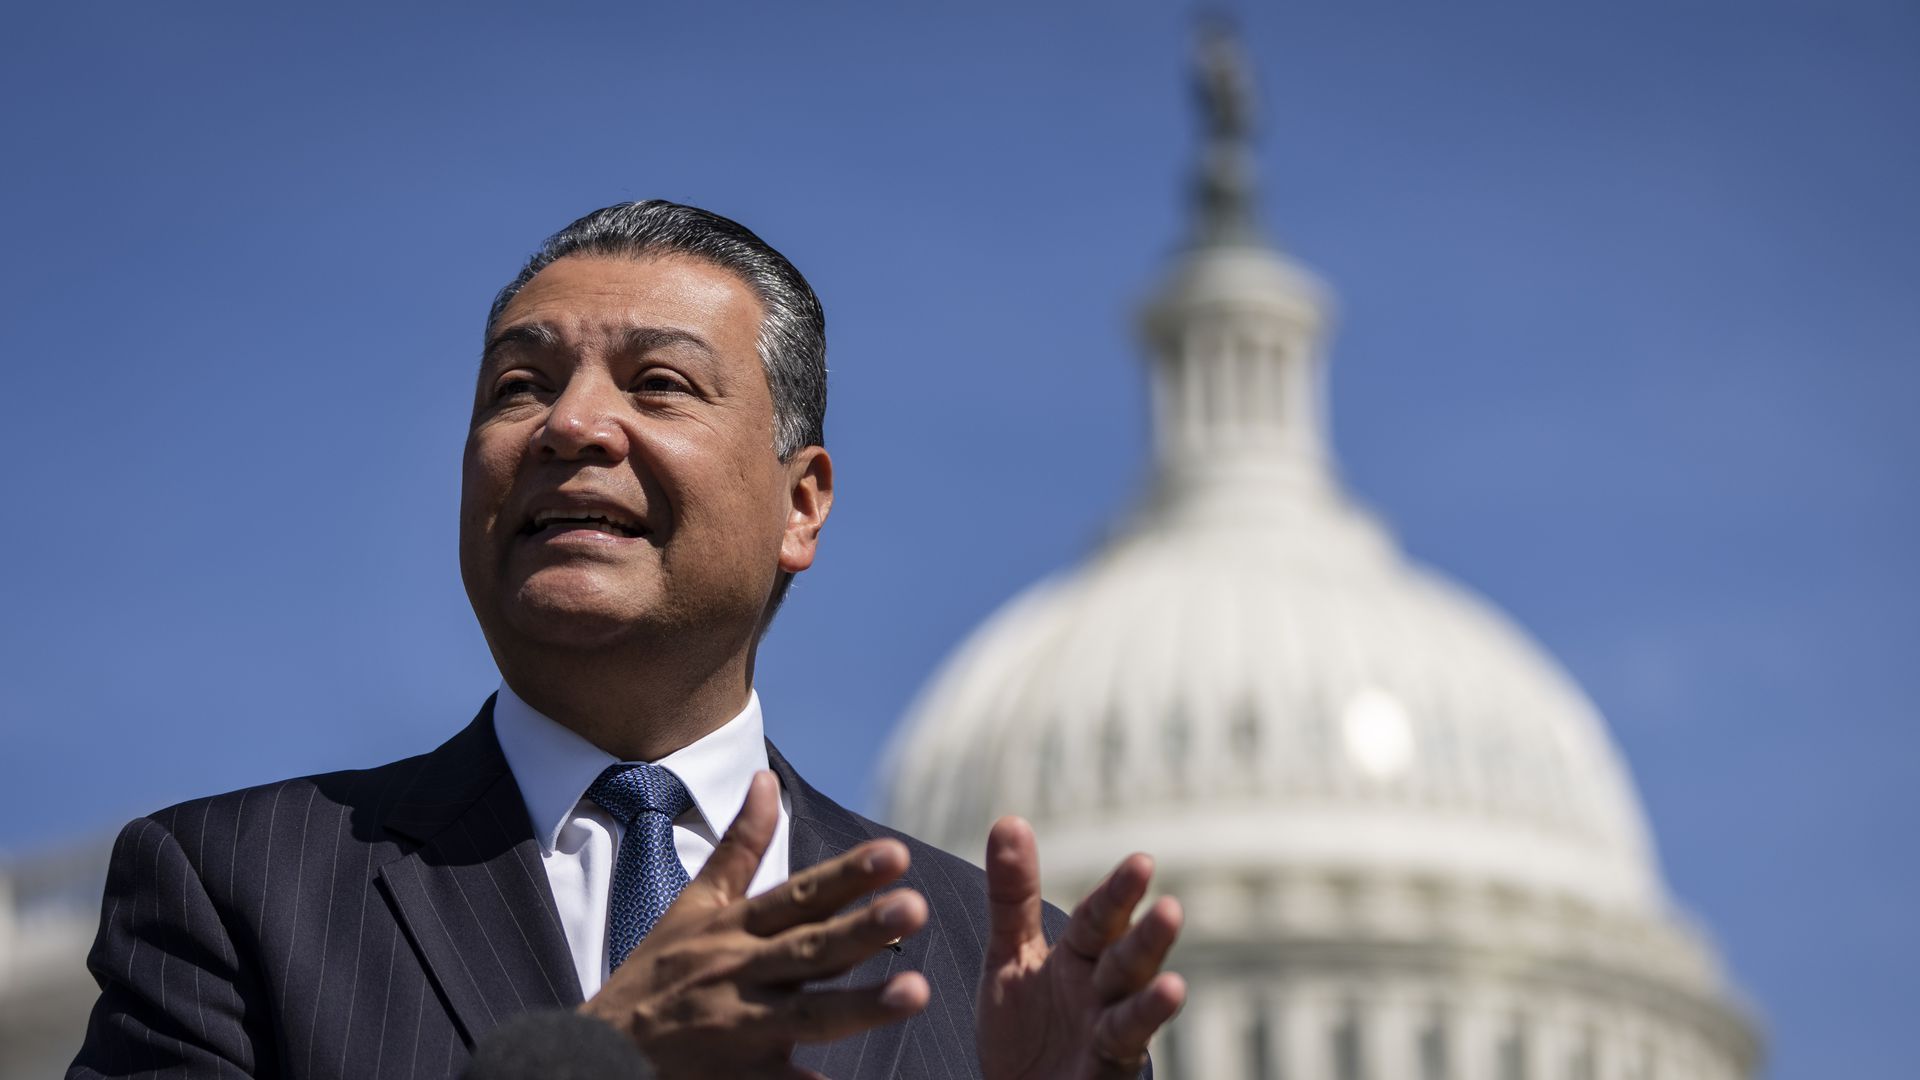 Sen. Alex Padilla stands outside with the U.S. Capitol building blurred behind him 